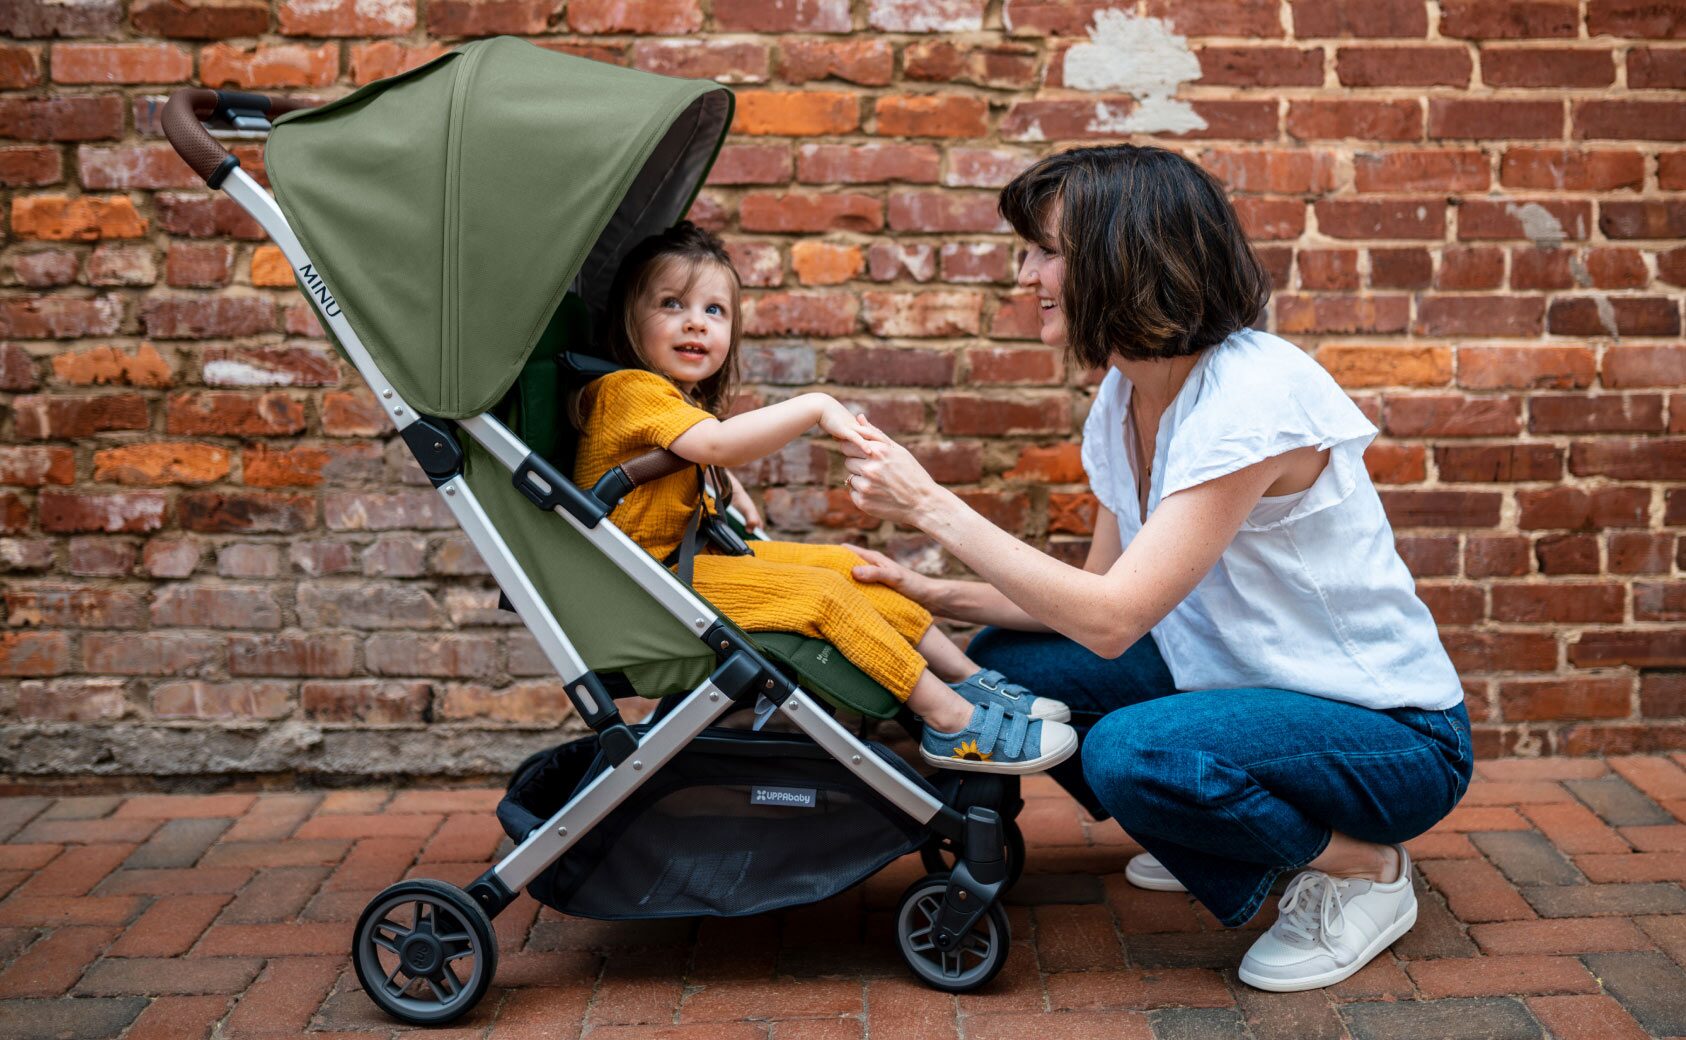 A baby sitting in the Minu Travel stroller from UPPAbaby.